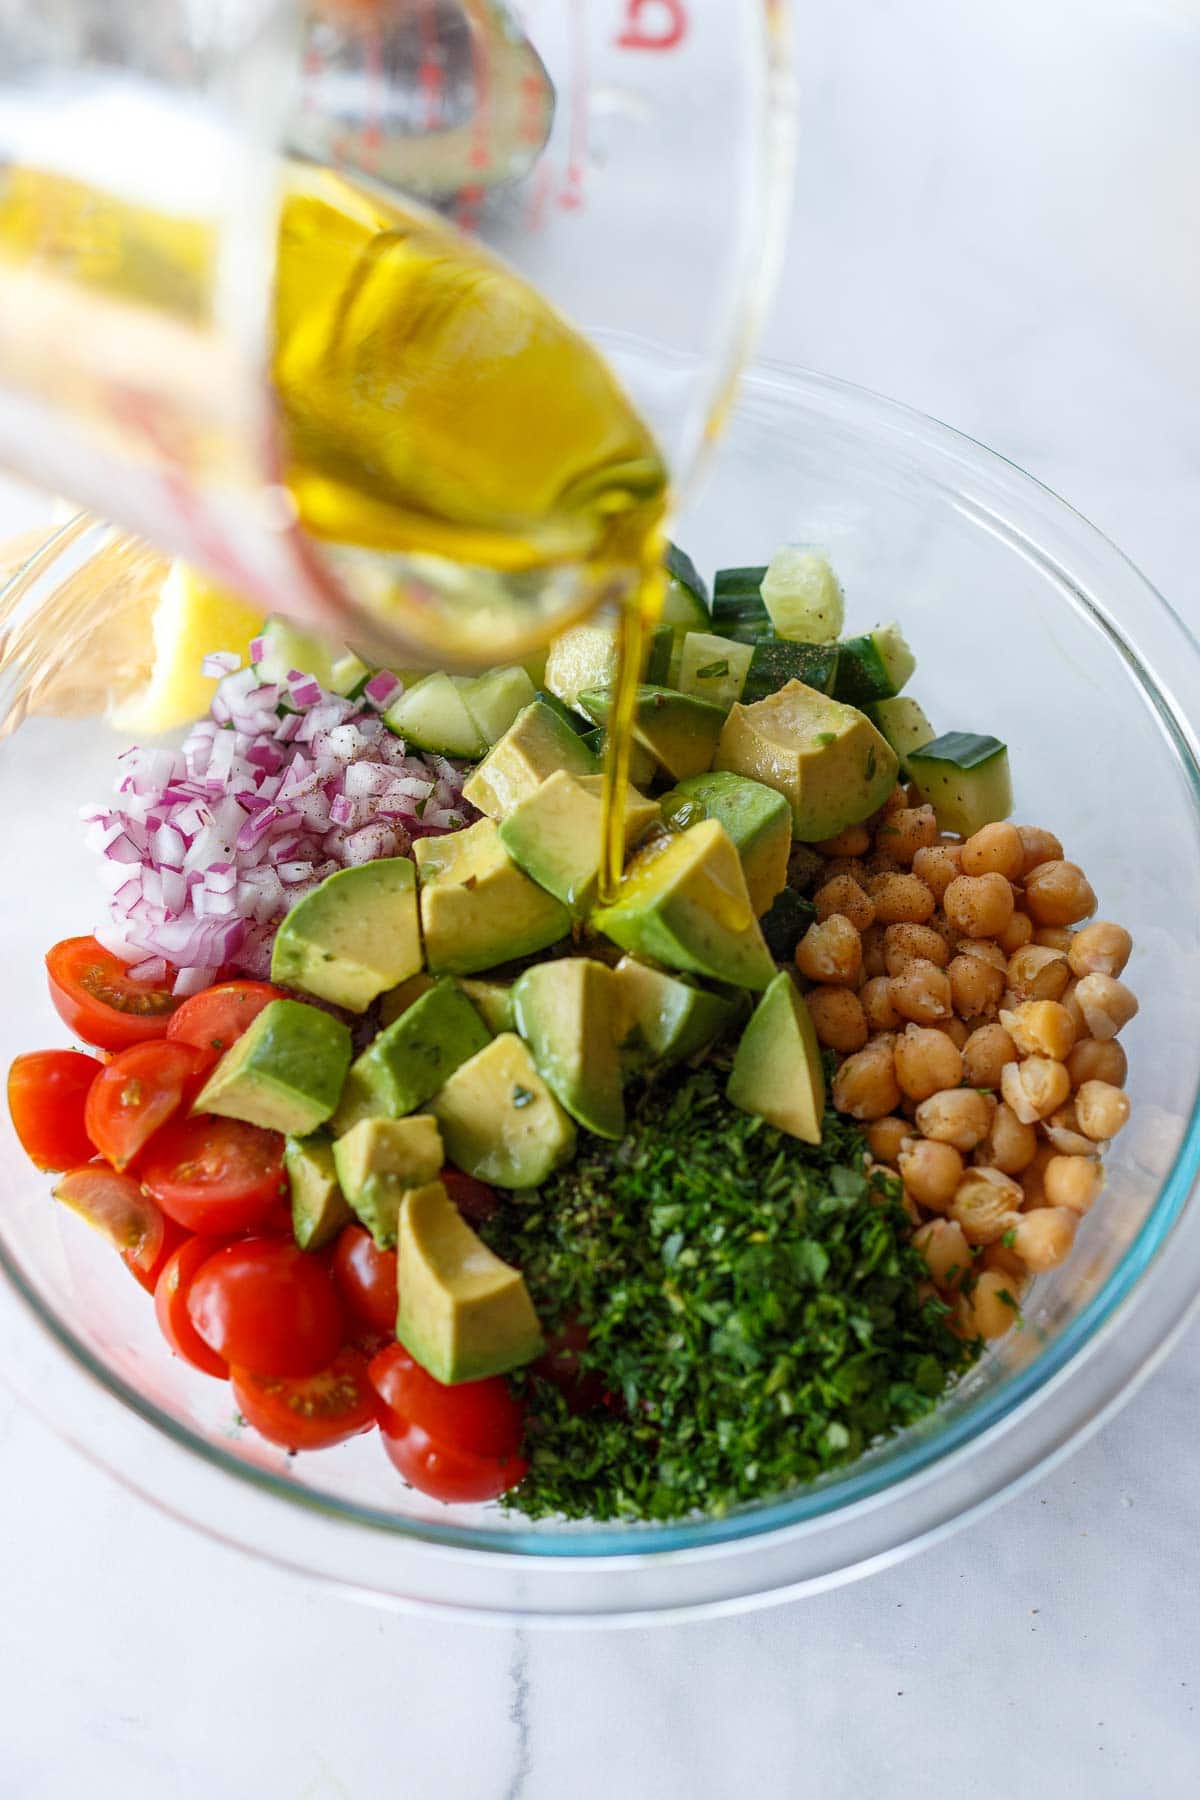 Pouring olive oil over Chickpea Salad.